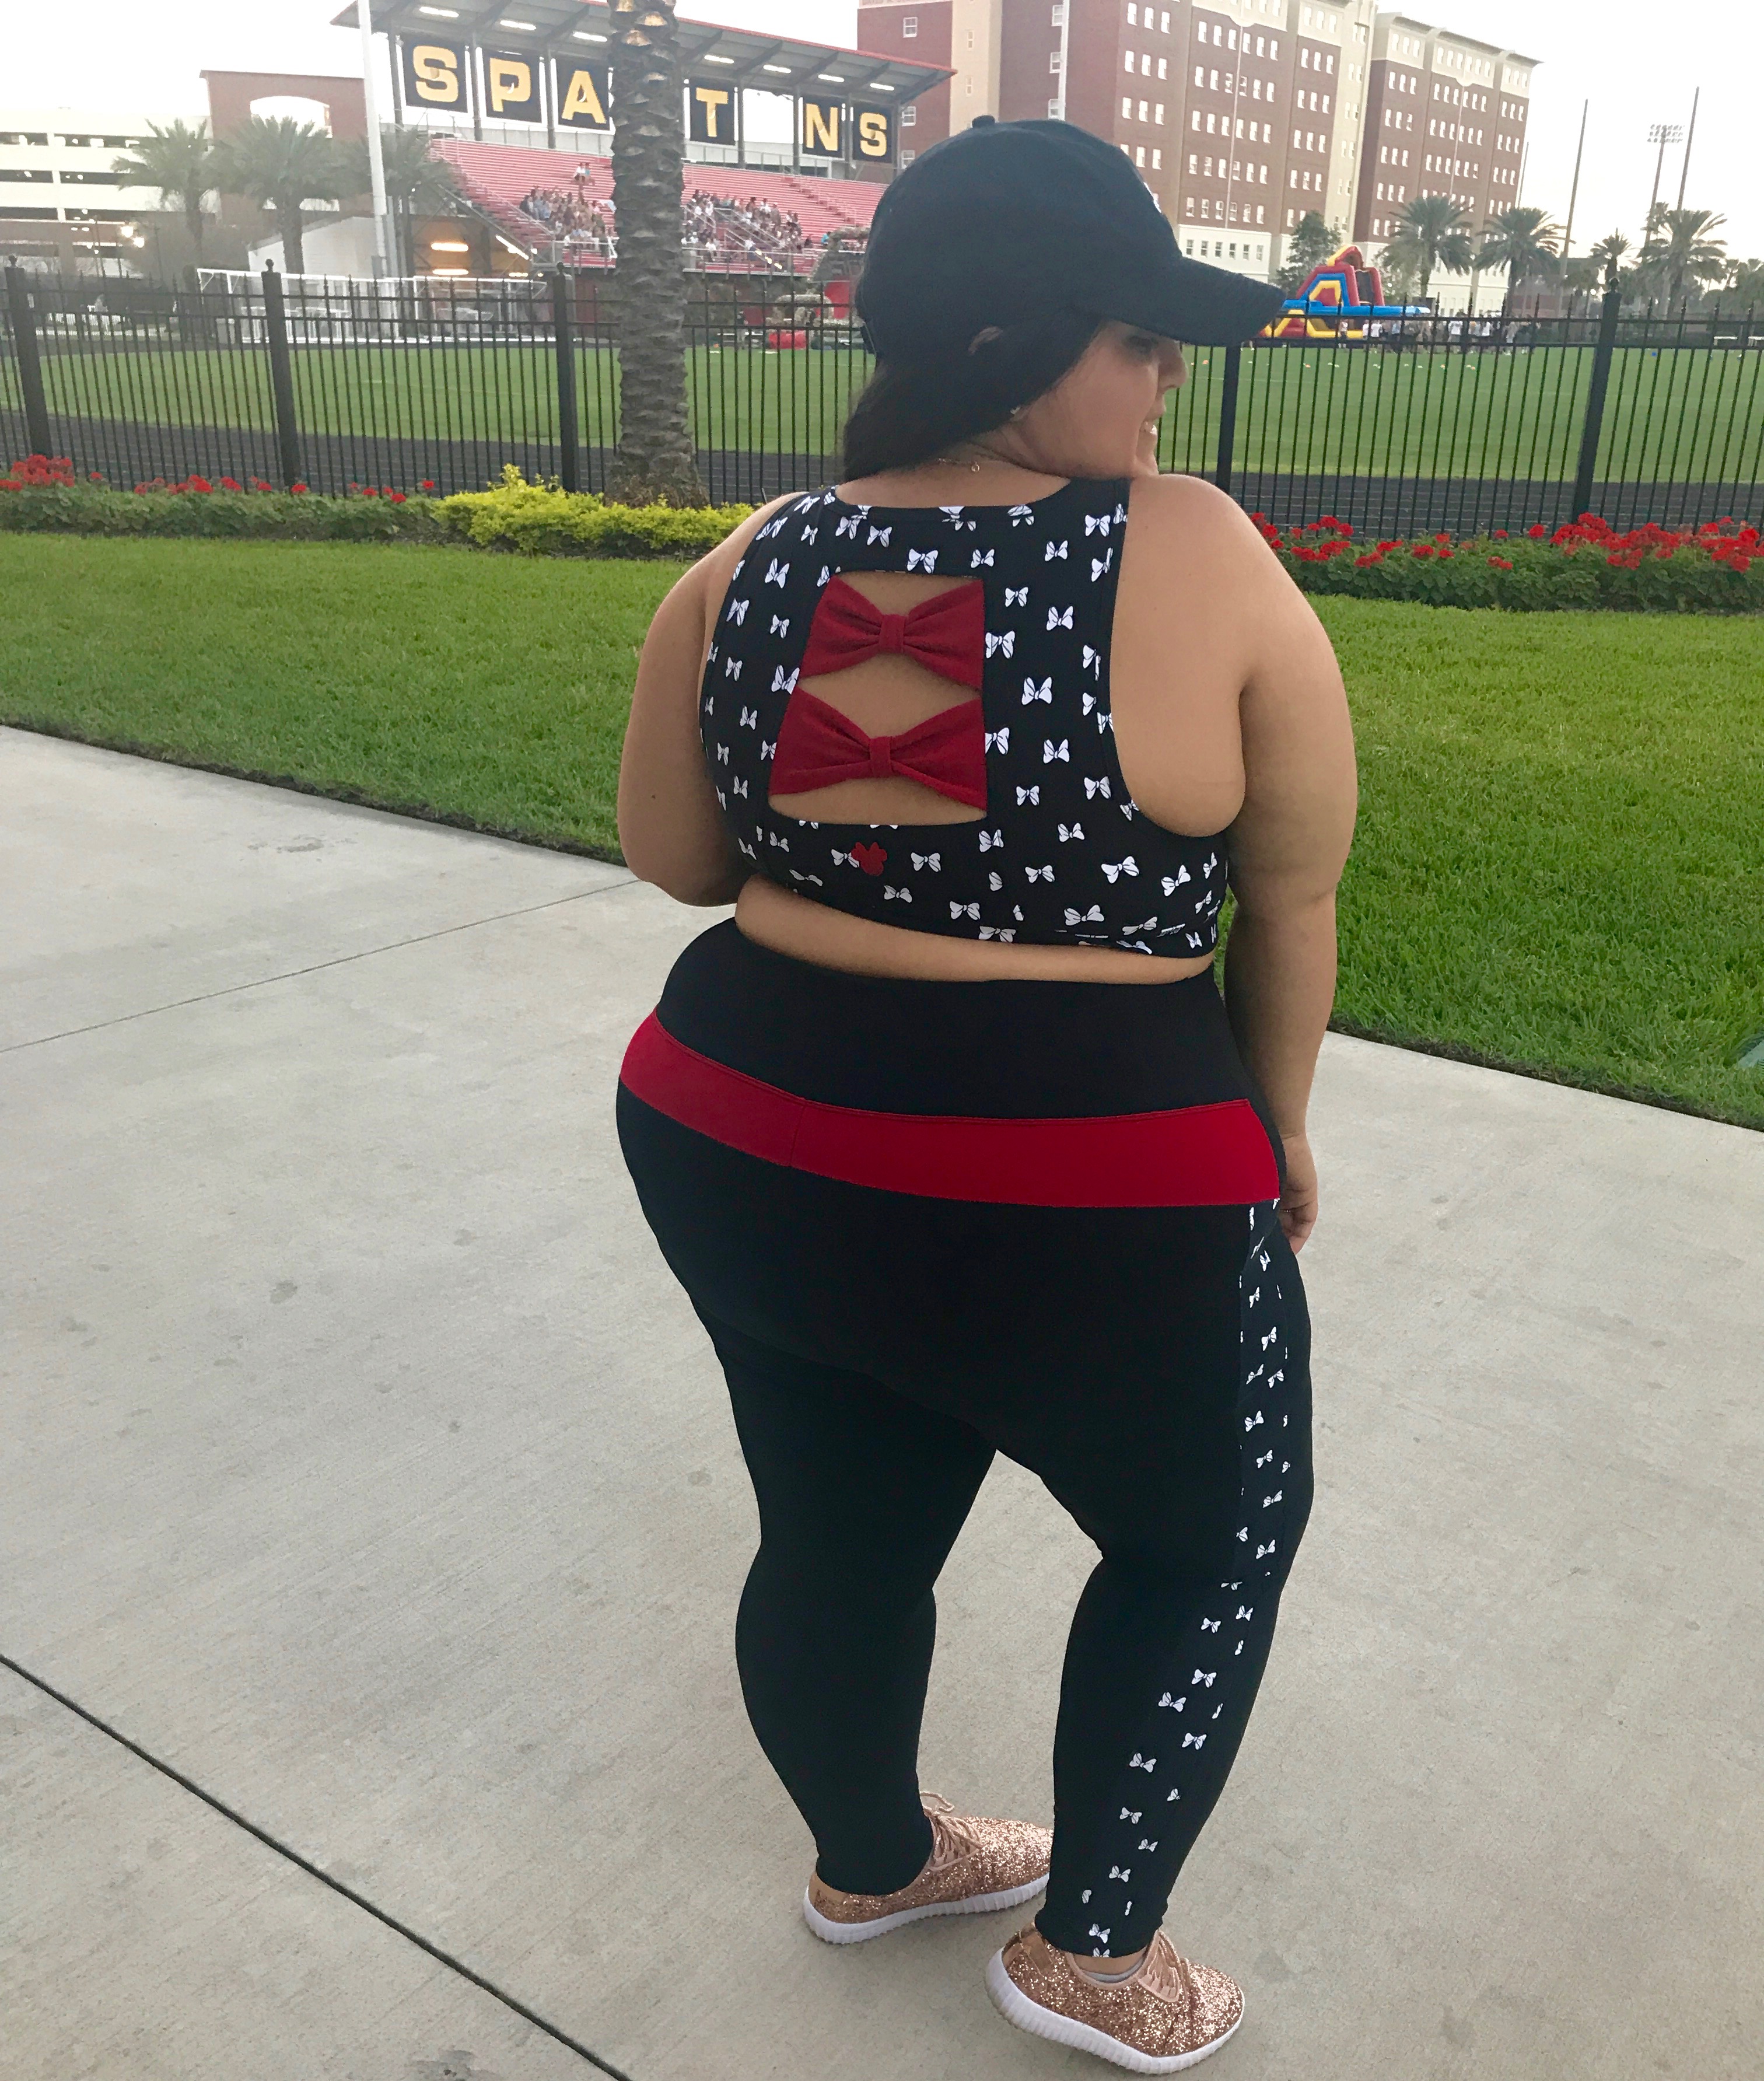 Plus Size Gym Style – Minnie Mouse Edition